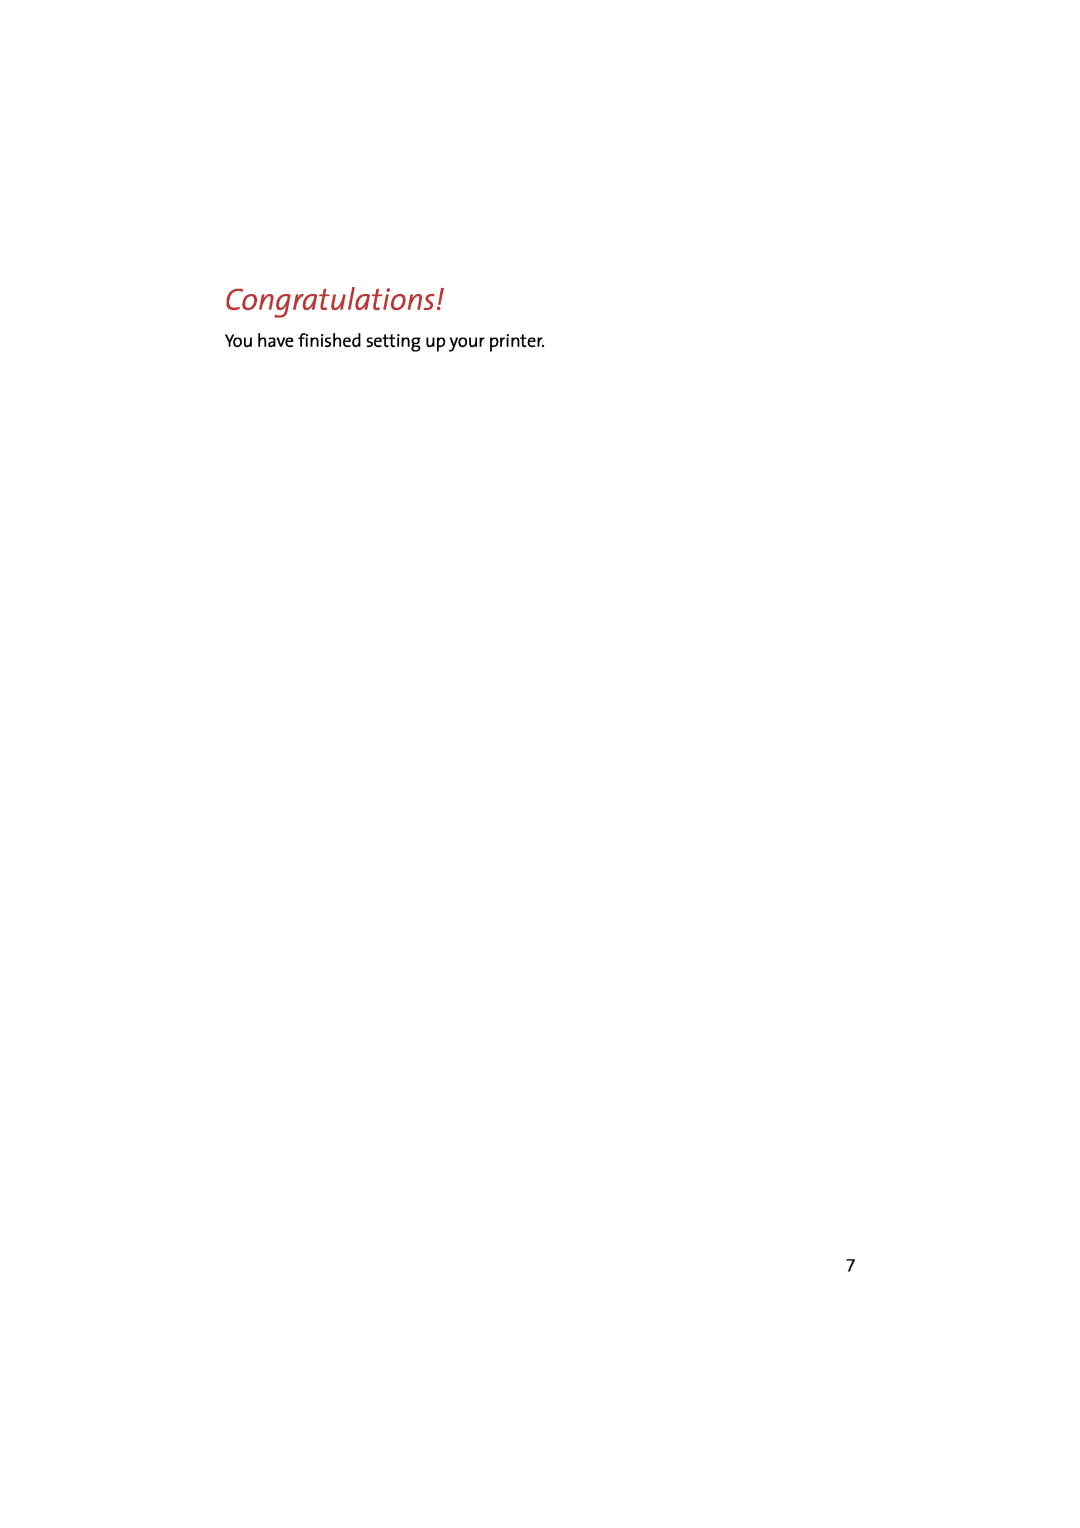 Compaq IJ650 manual Congratulations, You have finished setting up your printer 